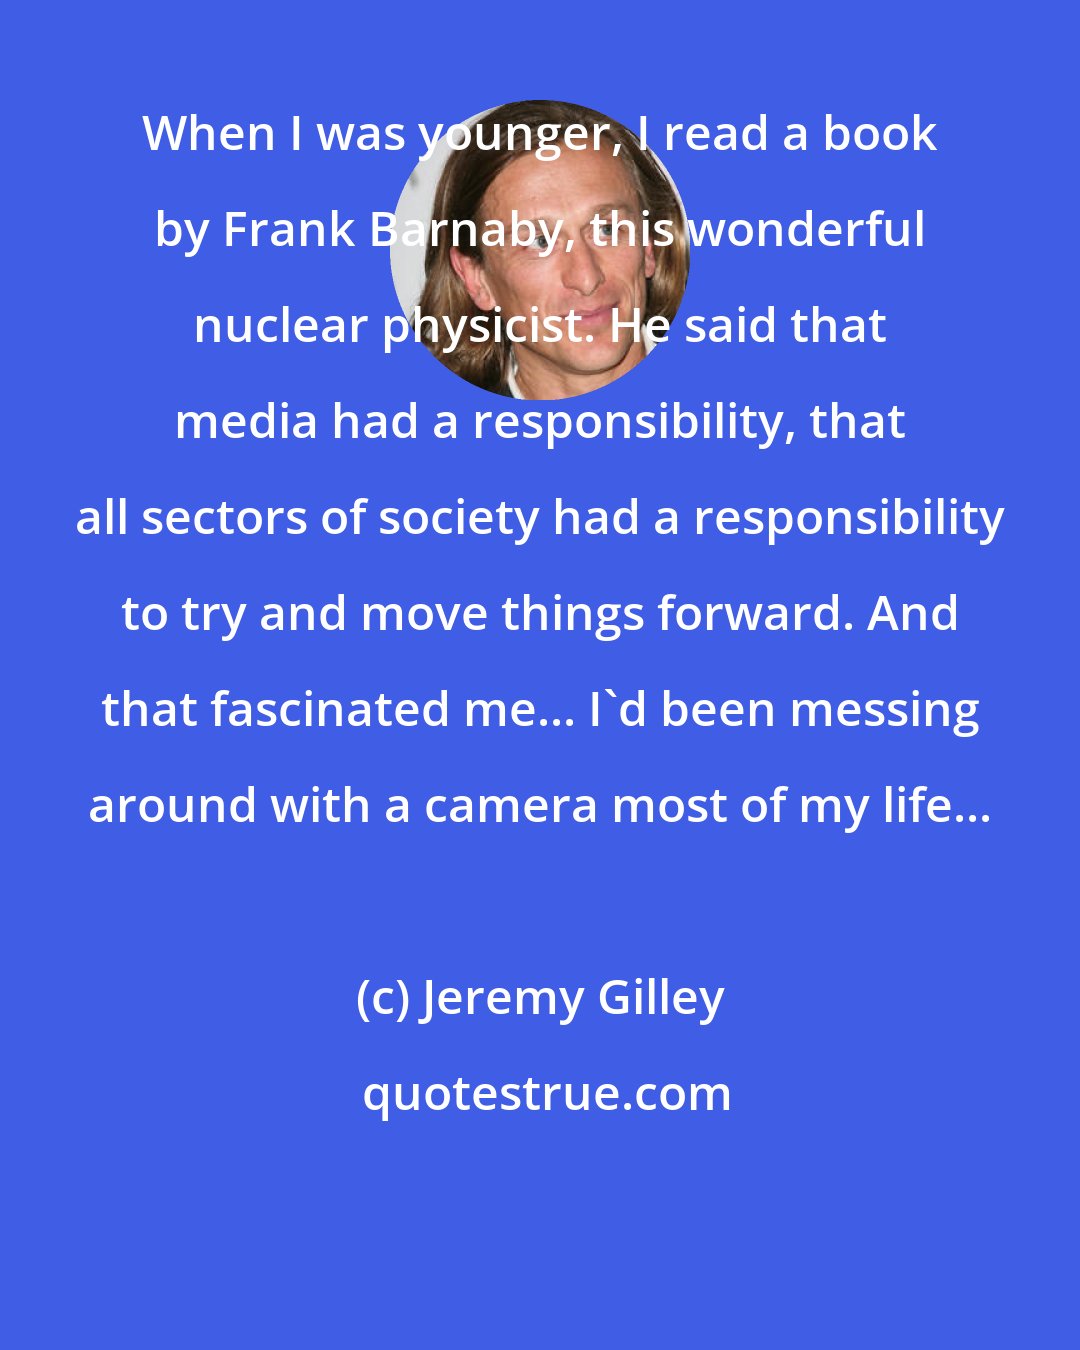 Jeremy Gilley: When I was younger, I read a book by Frank Barnaby, this wonderful nuclear physicist. He said that media had a responsibility, that all sectors of society had a responsibility to try and move things forward. And that fascinated me... I'd been messing around with a camera most of my life...